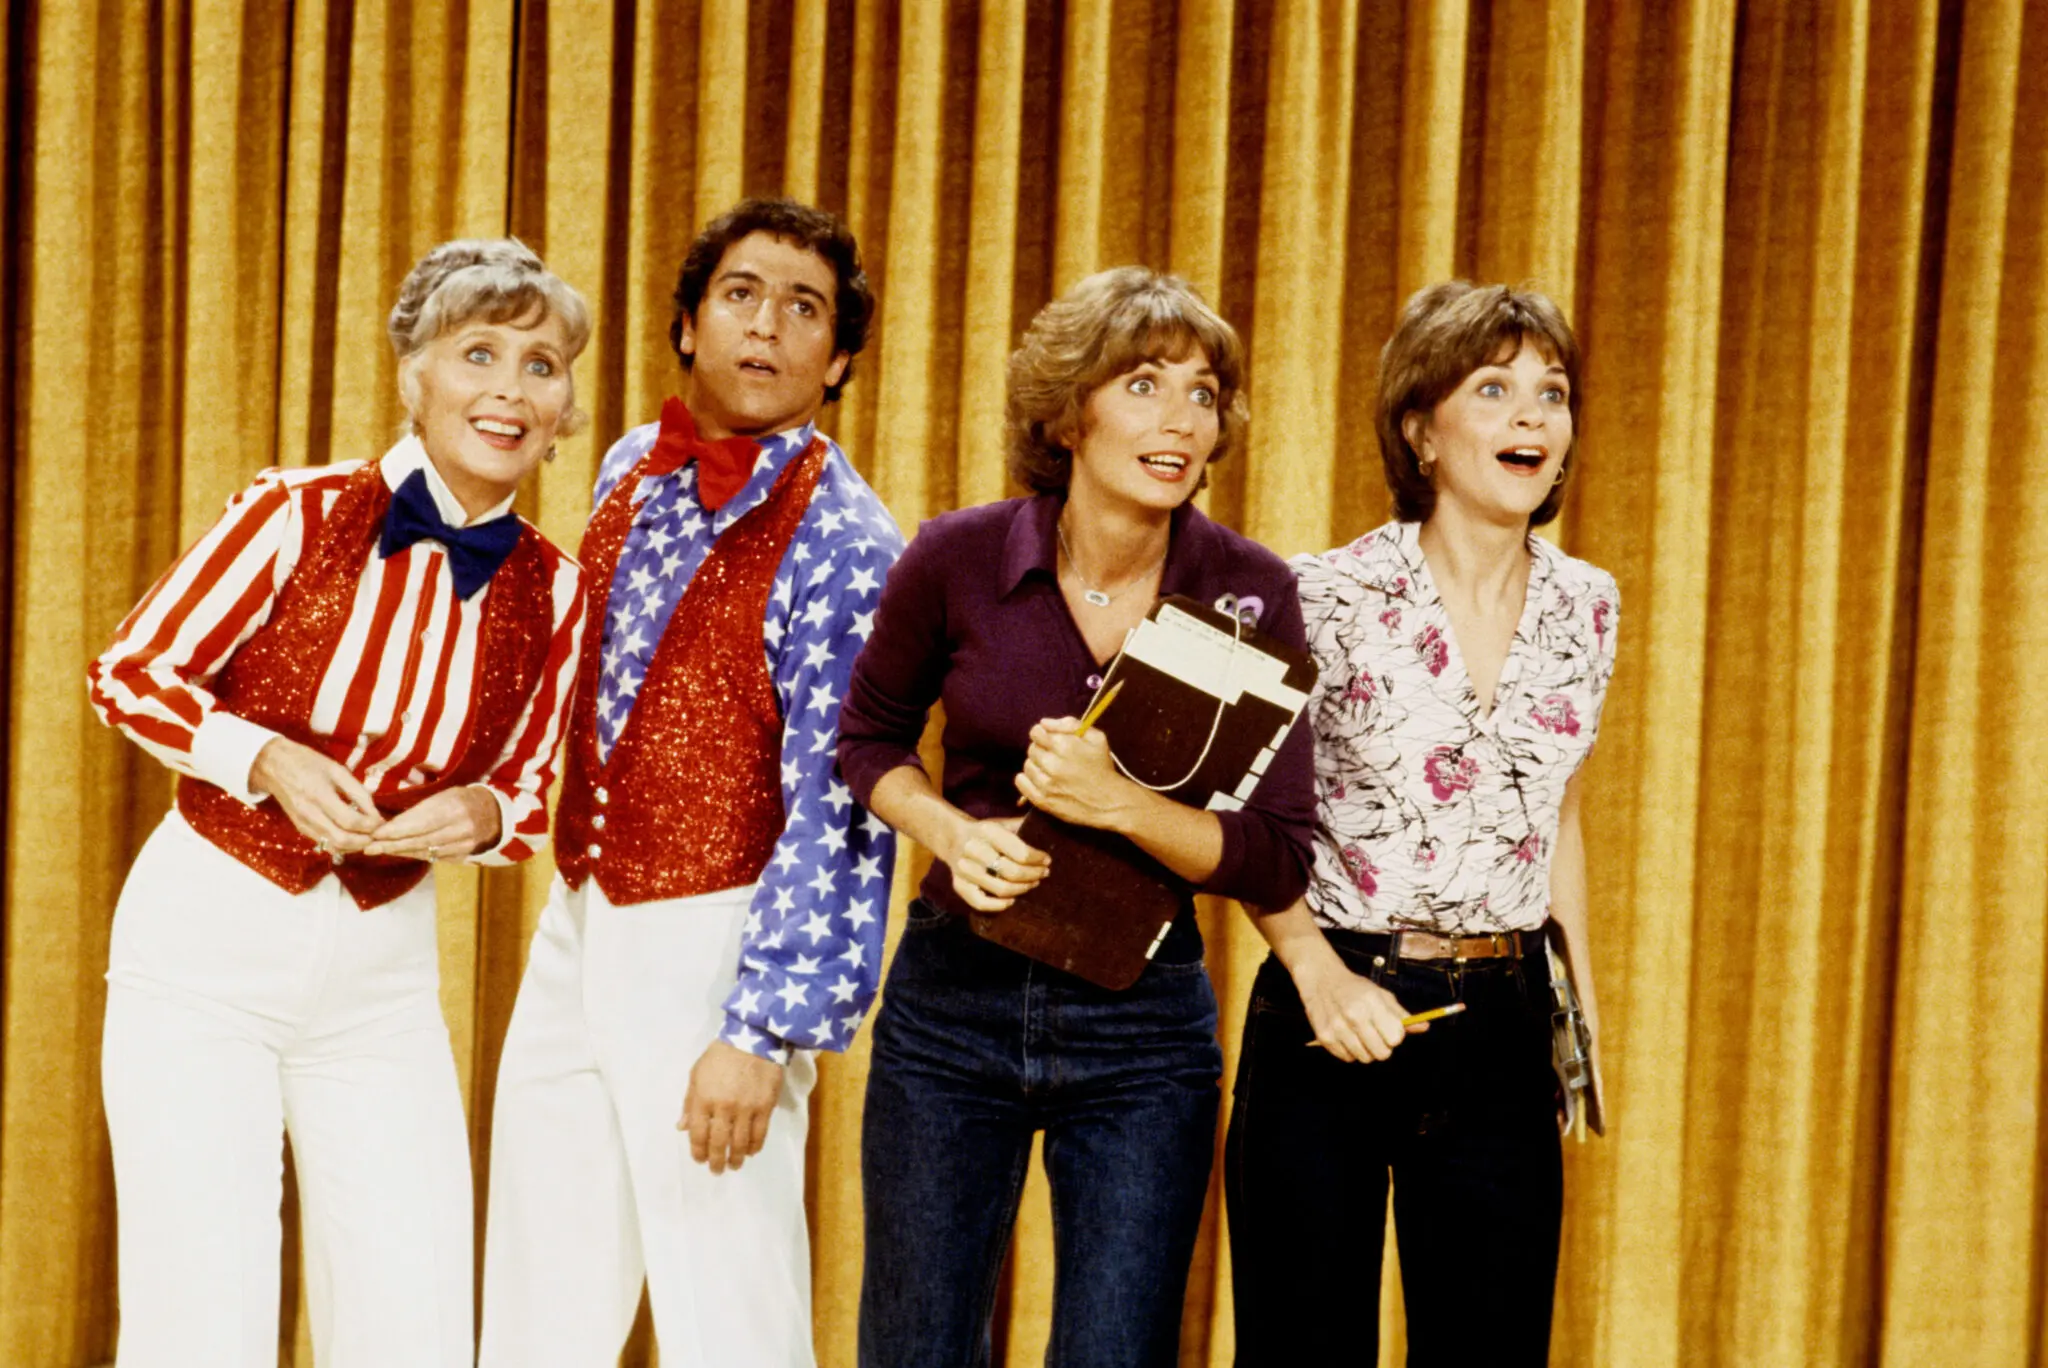 laverne and shirley season 1 torrent